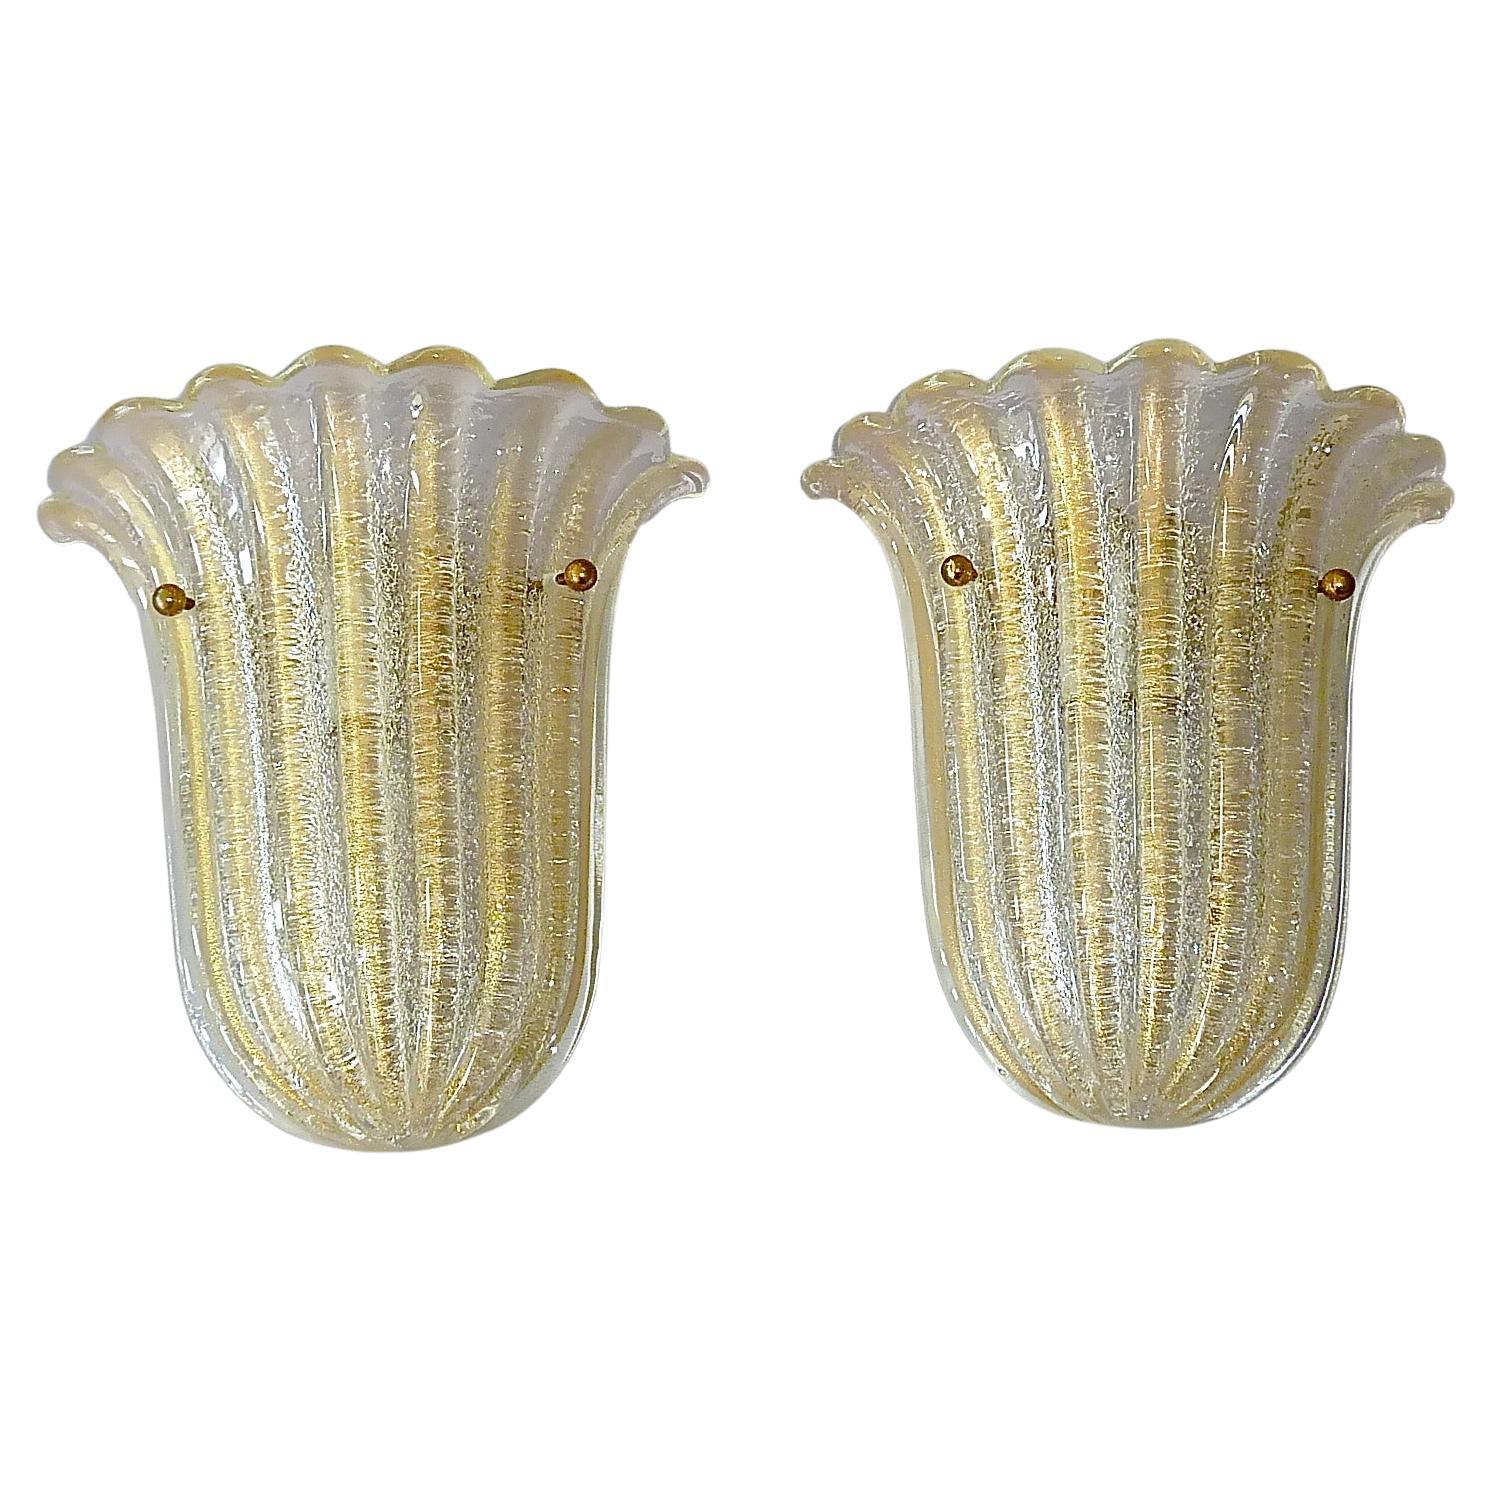 Signed Pair Barovier Toso Floral Tulip Leaf Sconces Murano Gold Art Glass 1970s For Sale